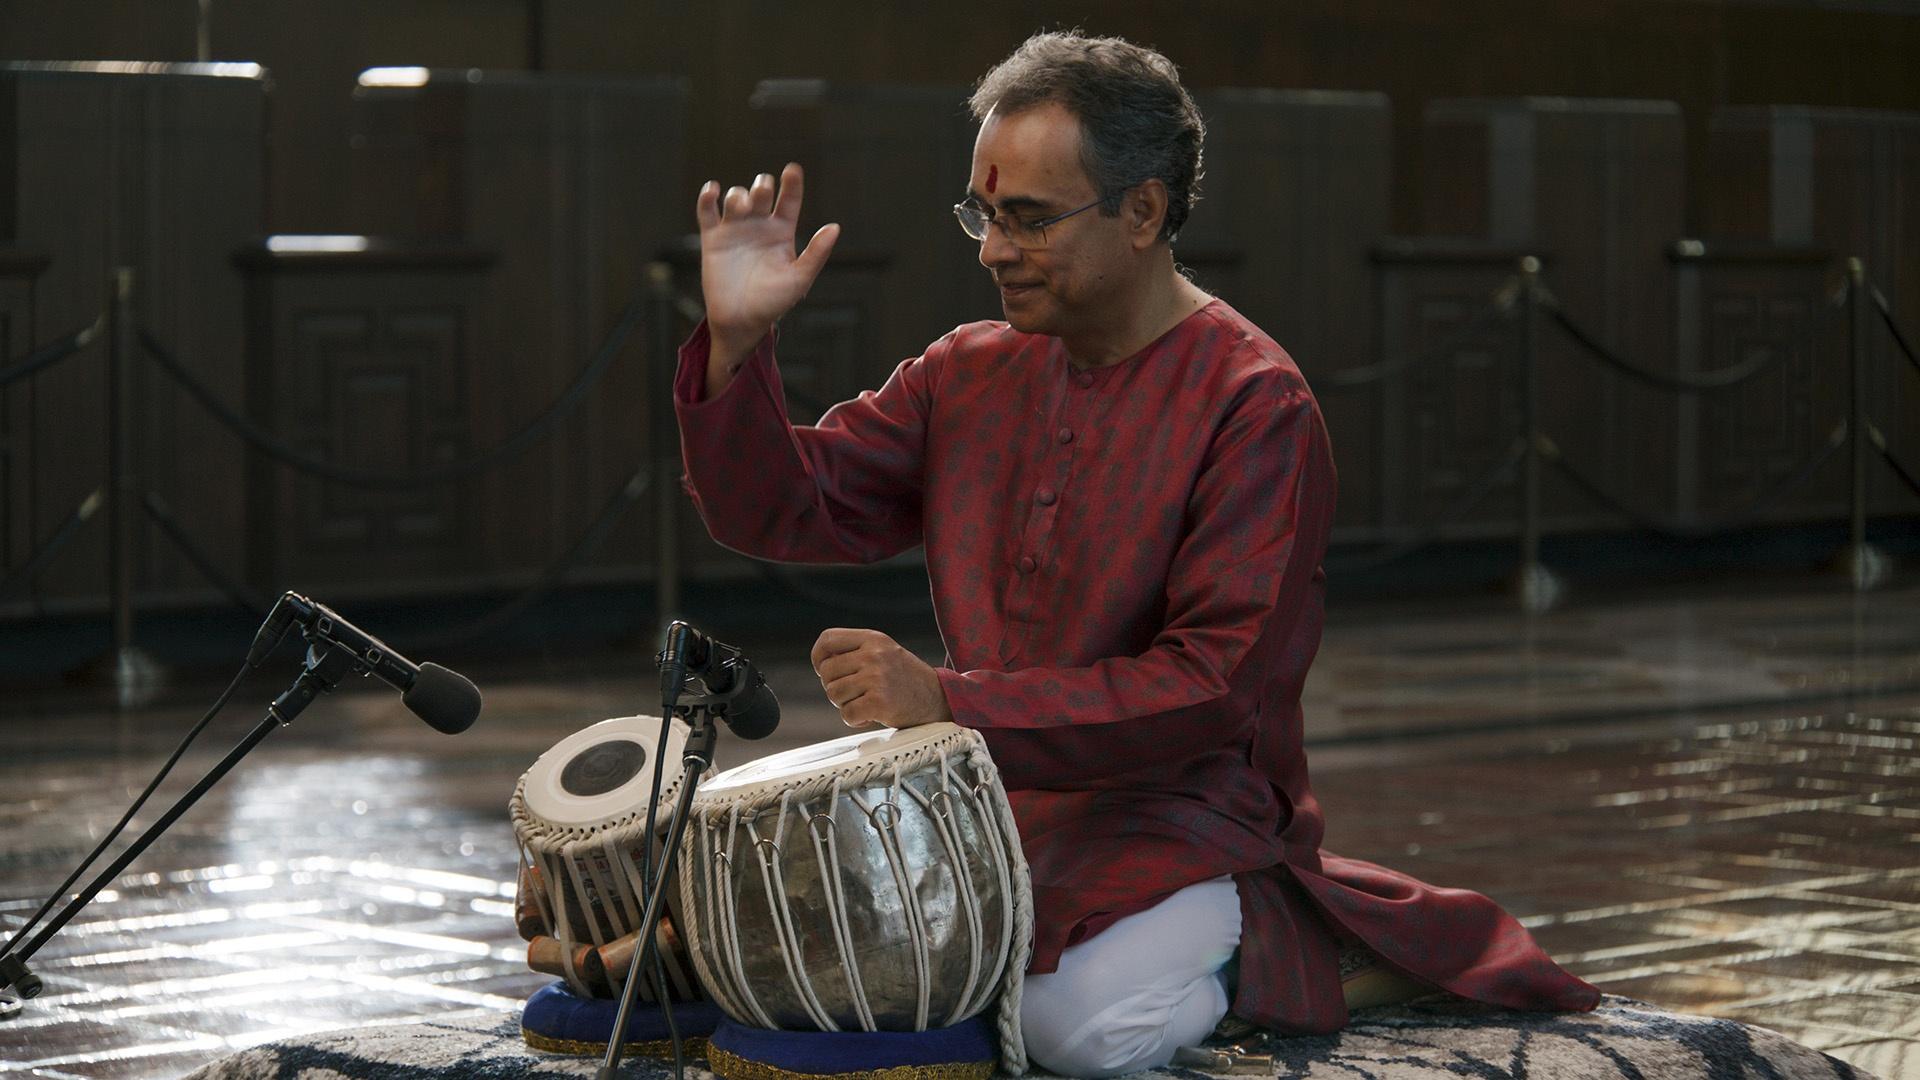 Sandeep Das playing bongos in front of microphones while kneeling on a gymnasium floor.